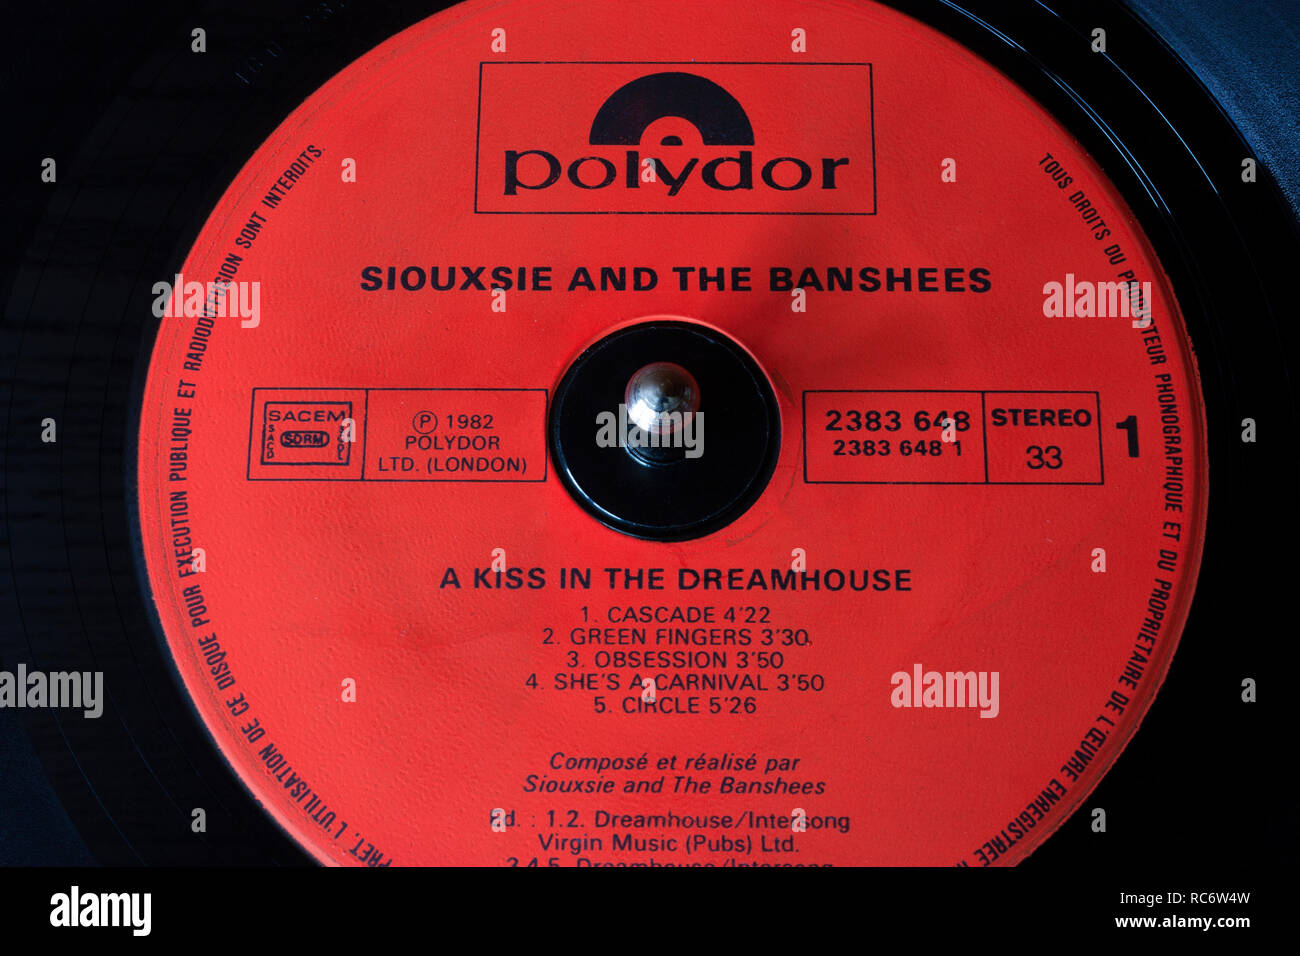 Siouxsie and the Banshees vinile & label - A Kiss in The Dreamhouse album rilasciato (1982) Foto Stock